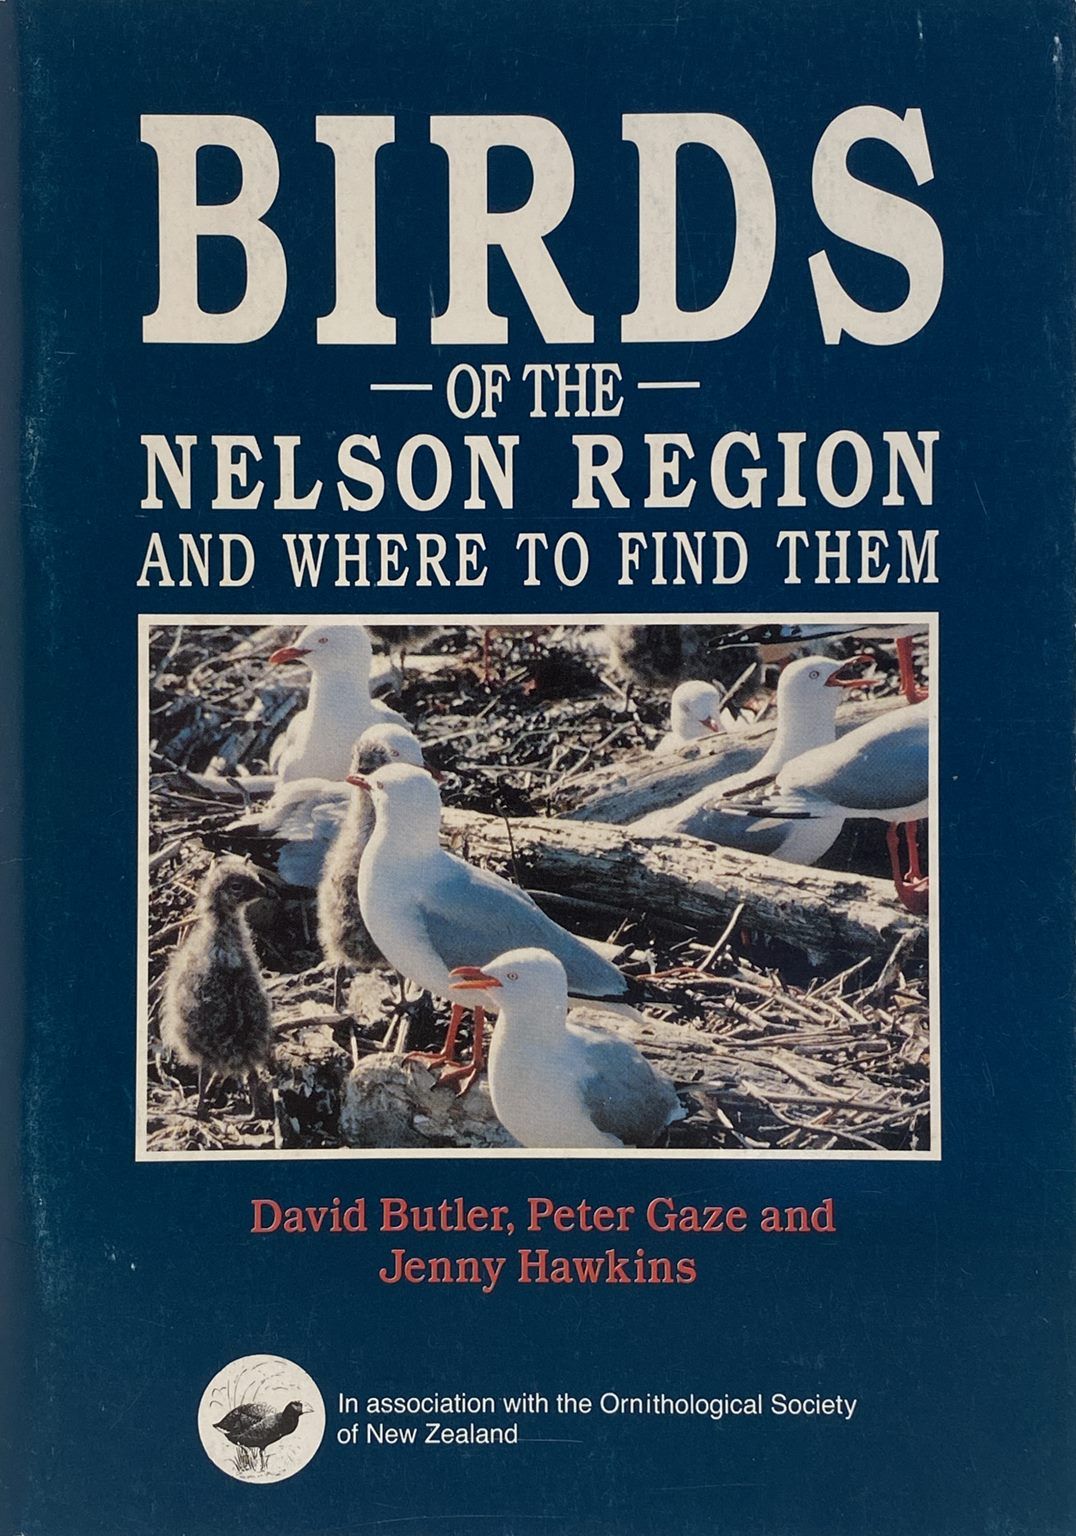 BIRDS OF THE NELSON REGION and Where to Find Them